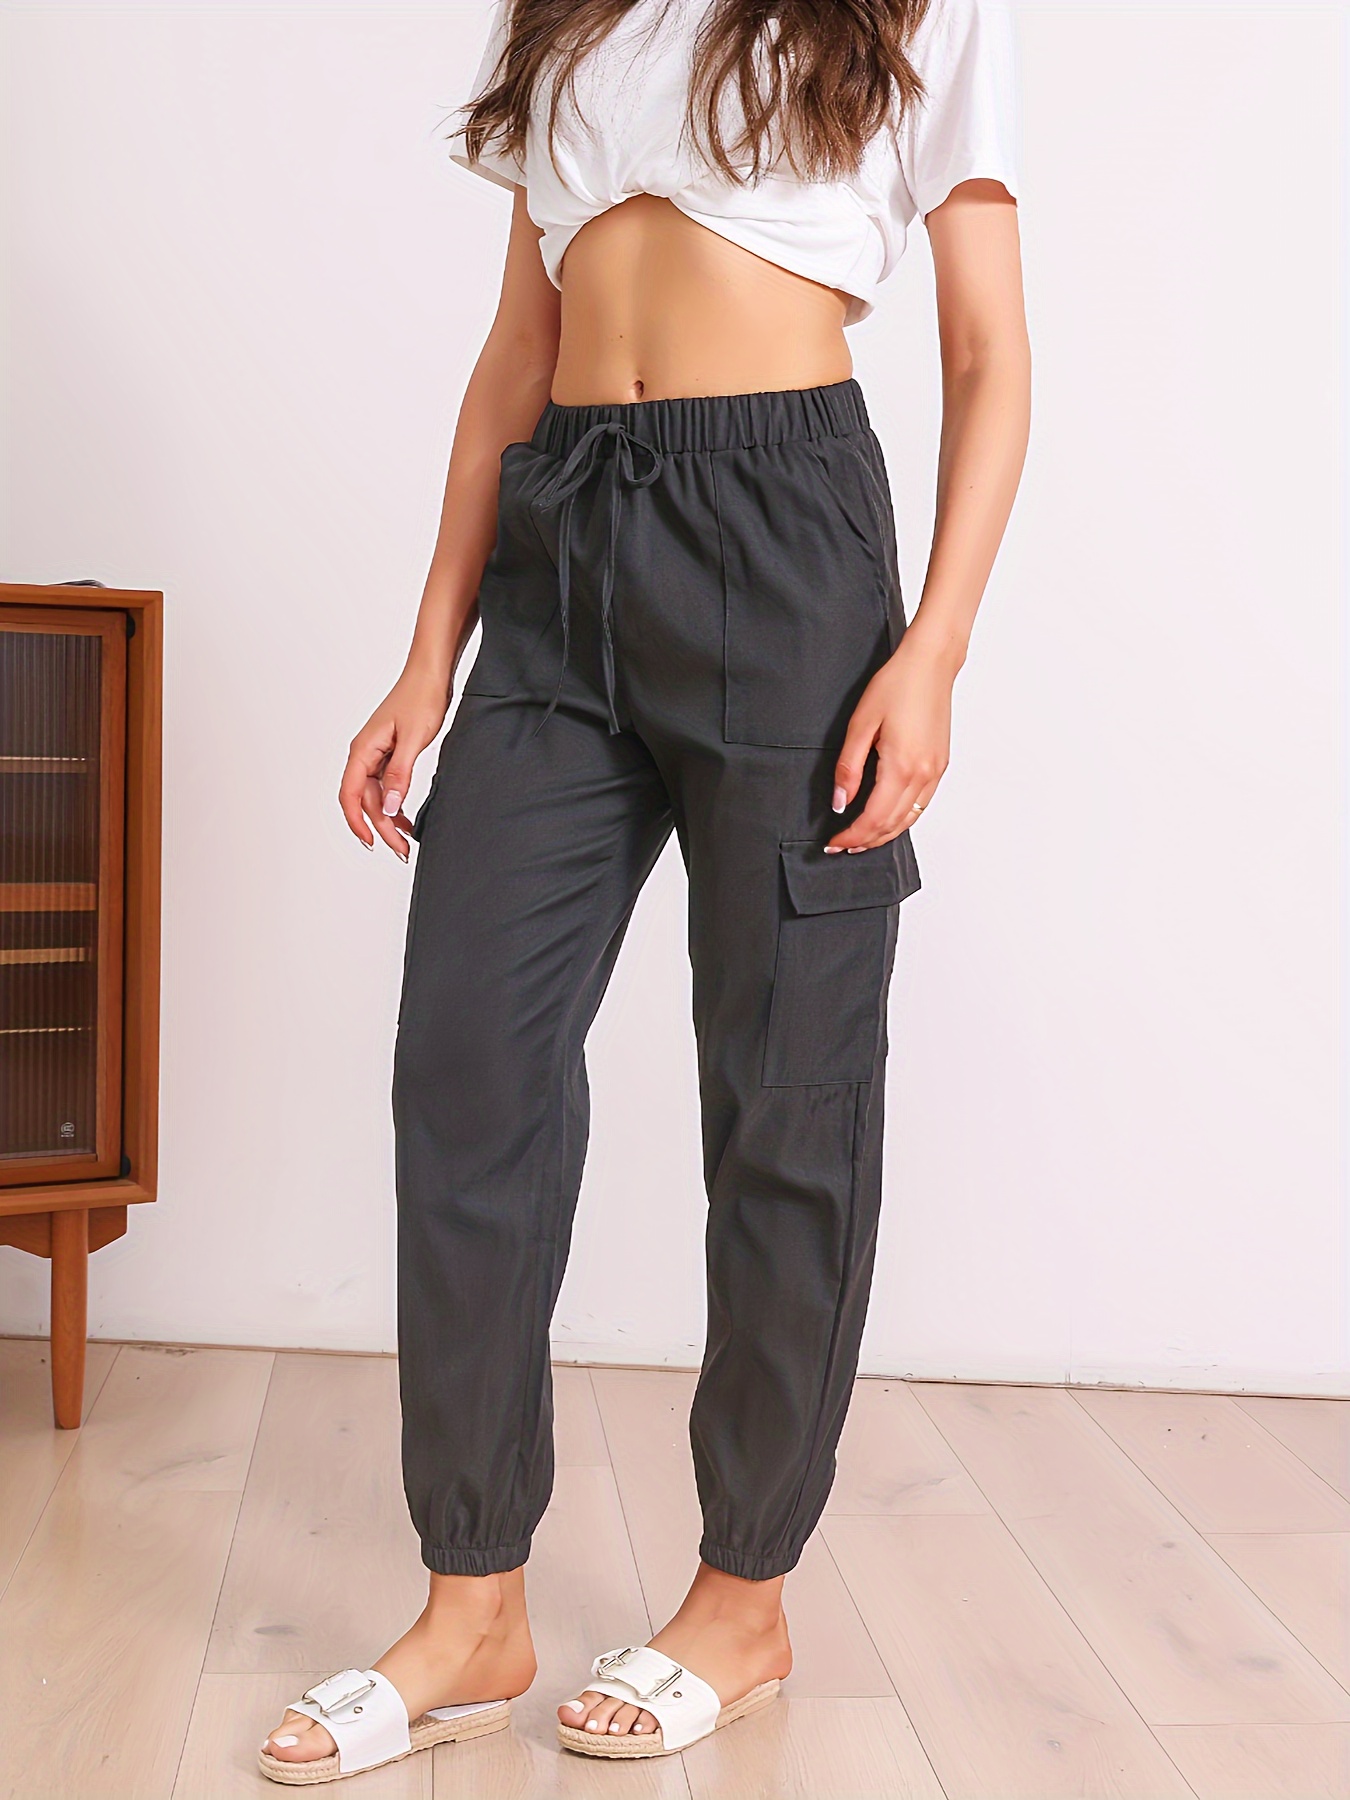 Winter Drawstring Cargo Pants for Women High Waist Plus Size Bell Bottom  Pant with Flap-Pockets Solid Color Floor Length Flare Leg Trousers 